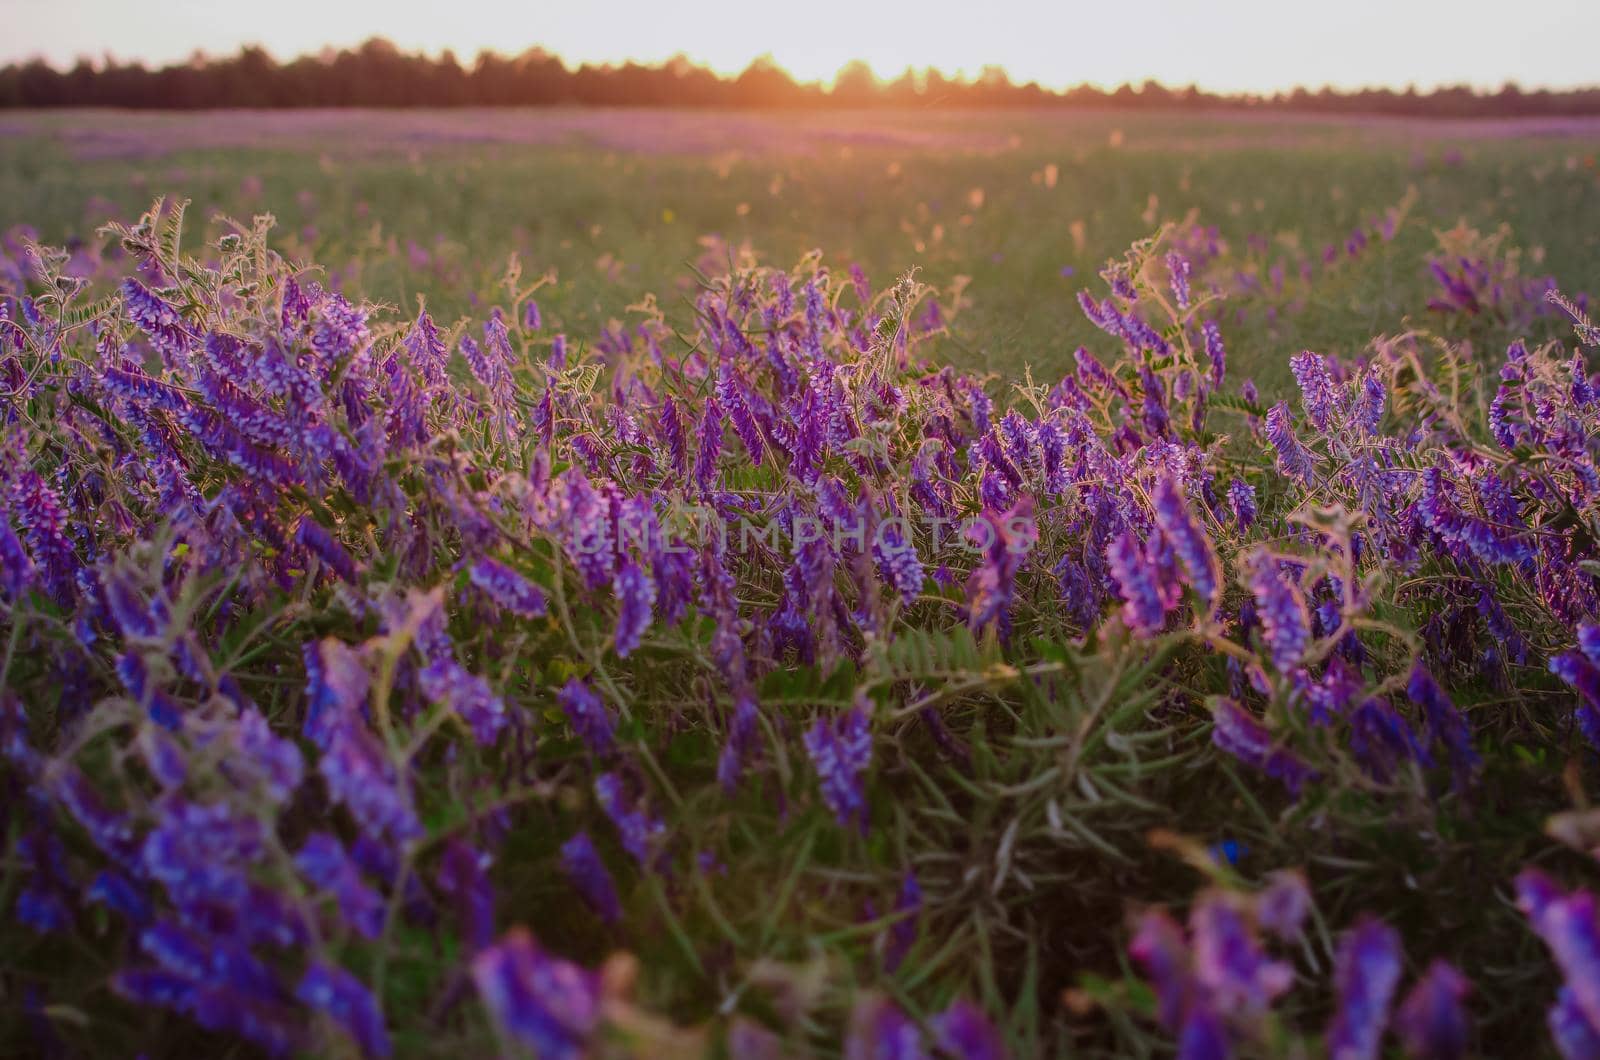 Purple lilac curly tall flowers in a field at sunset day. The sun is setting on the horizon. Summer green field with tall grass and plants.